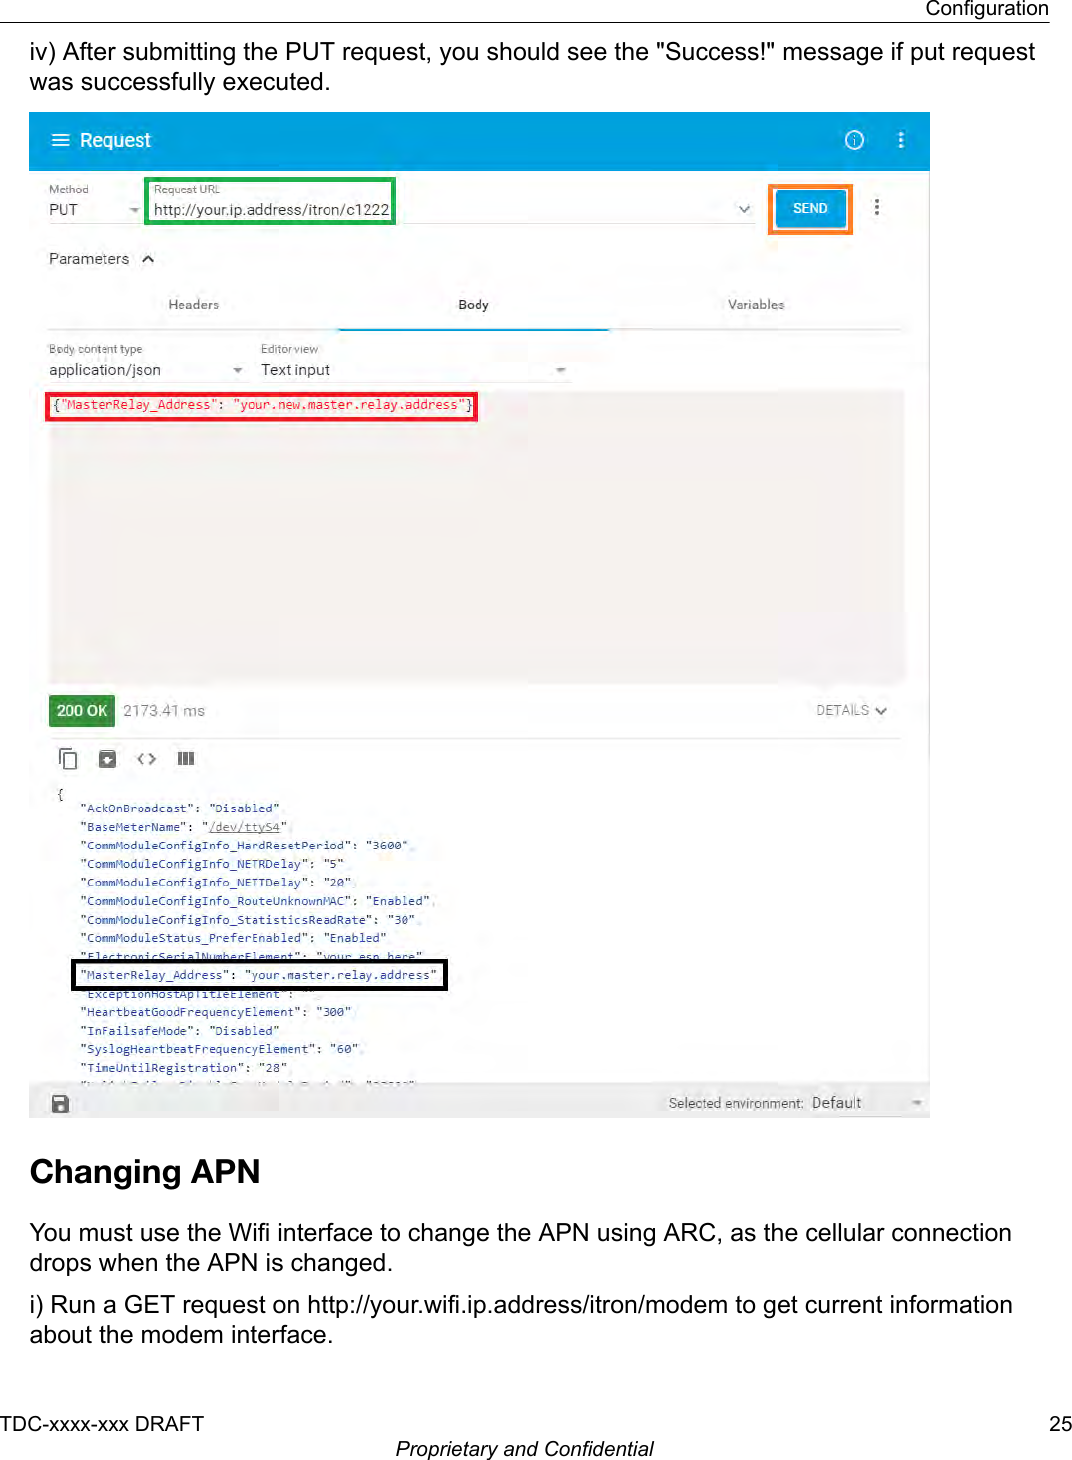 iv) After submitting the PUT request, you should see the &quot;Success!&quot; message if put requestwas successfully executed.Changing APNYou must use the Wifi interface to change the APN using ARC, as the cellular connectiondrops when the APN is changed.i) Run a GET request on http://your.wifi.ip.address/itron/modem to get current informationabout the modem interface.ConfigurationTDC-xxxx-xxx DRAFT 25Proprietary and Confidential